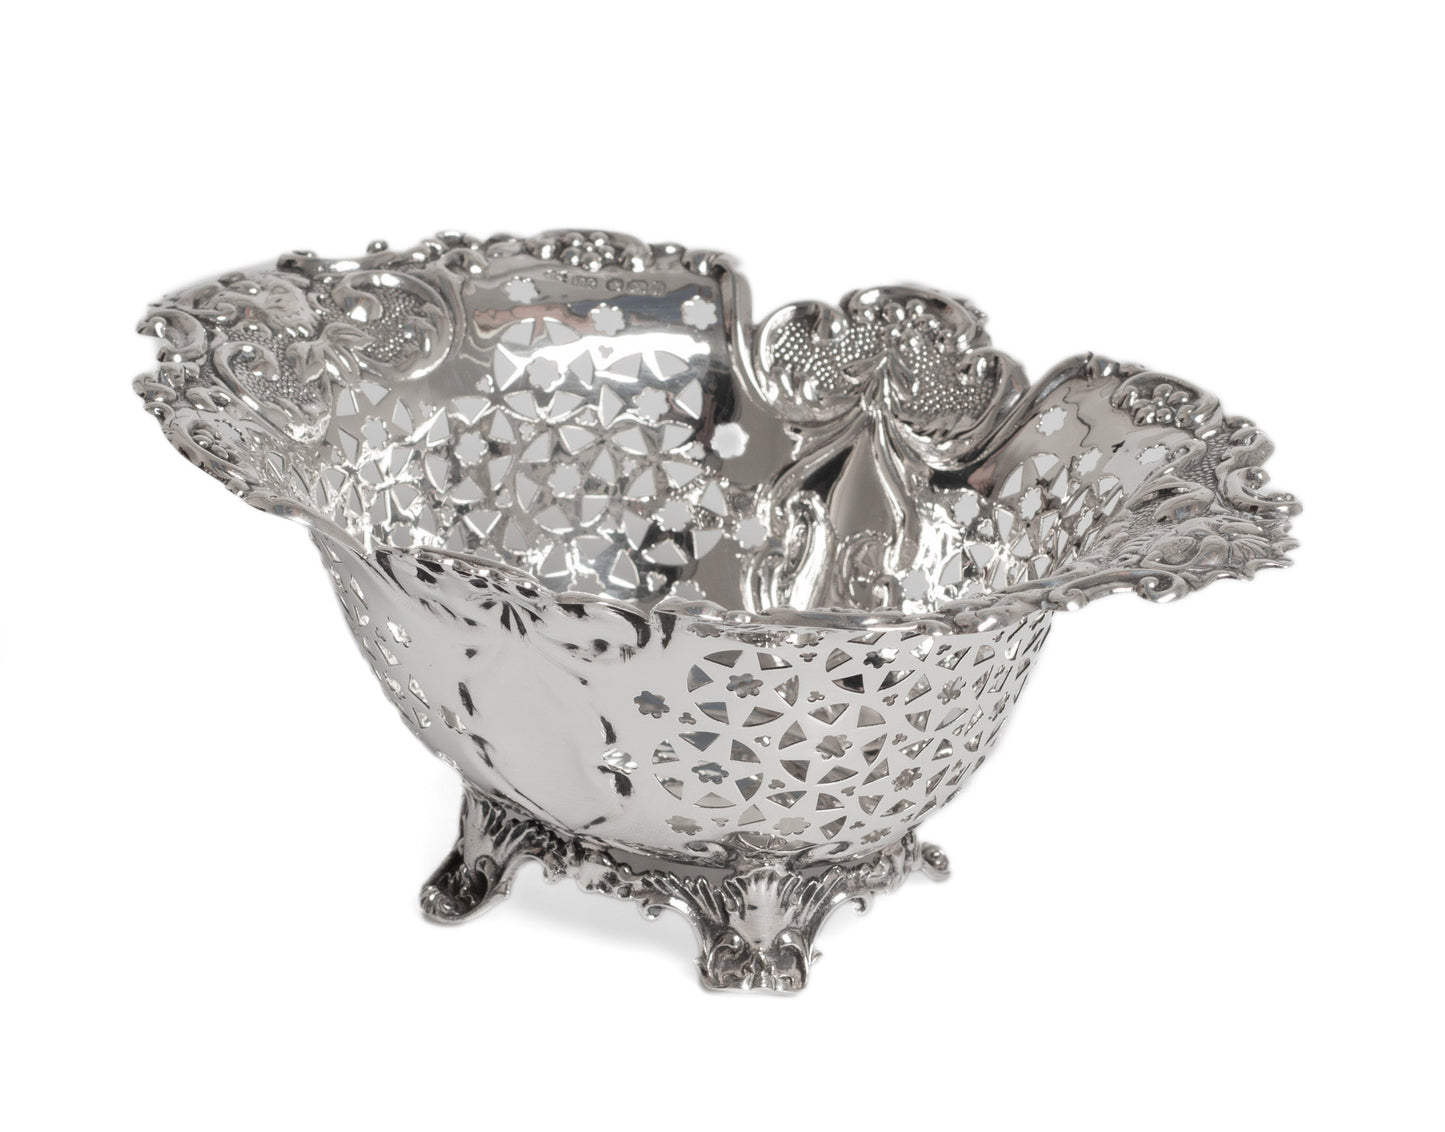 Fine Quality Victorian Silver Pierced Sweetmeat Basket by Joseph Rodgers 1899 (Code 2762)